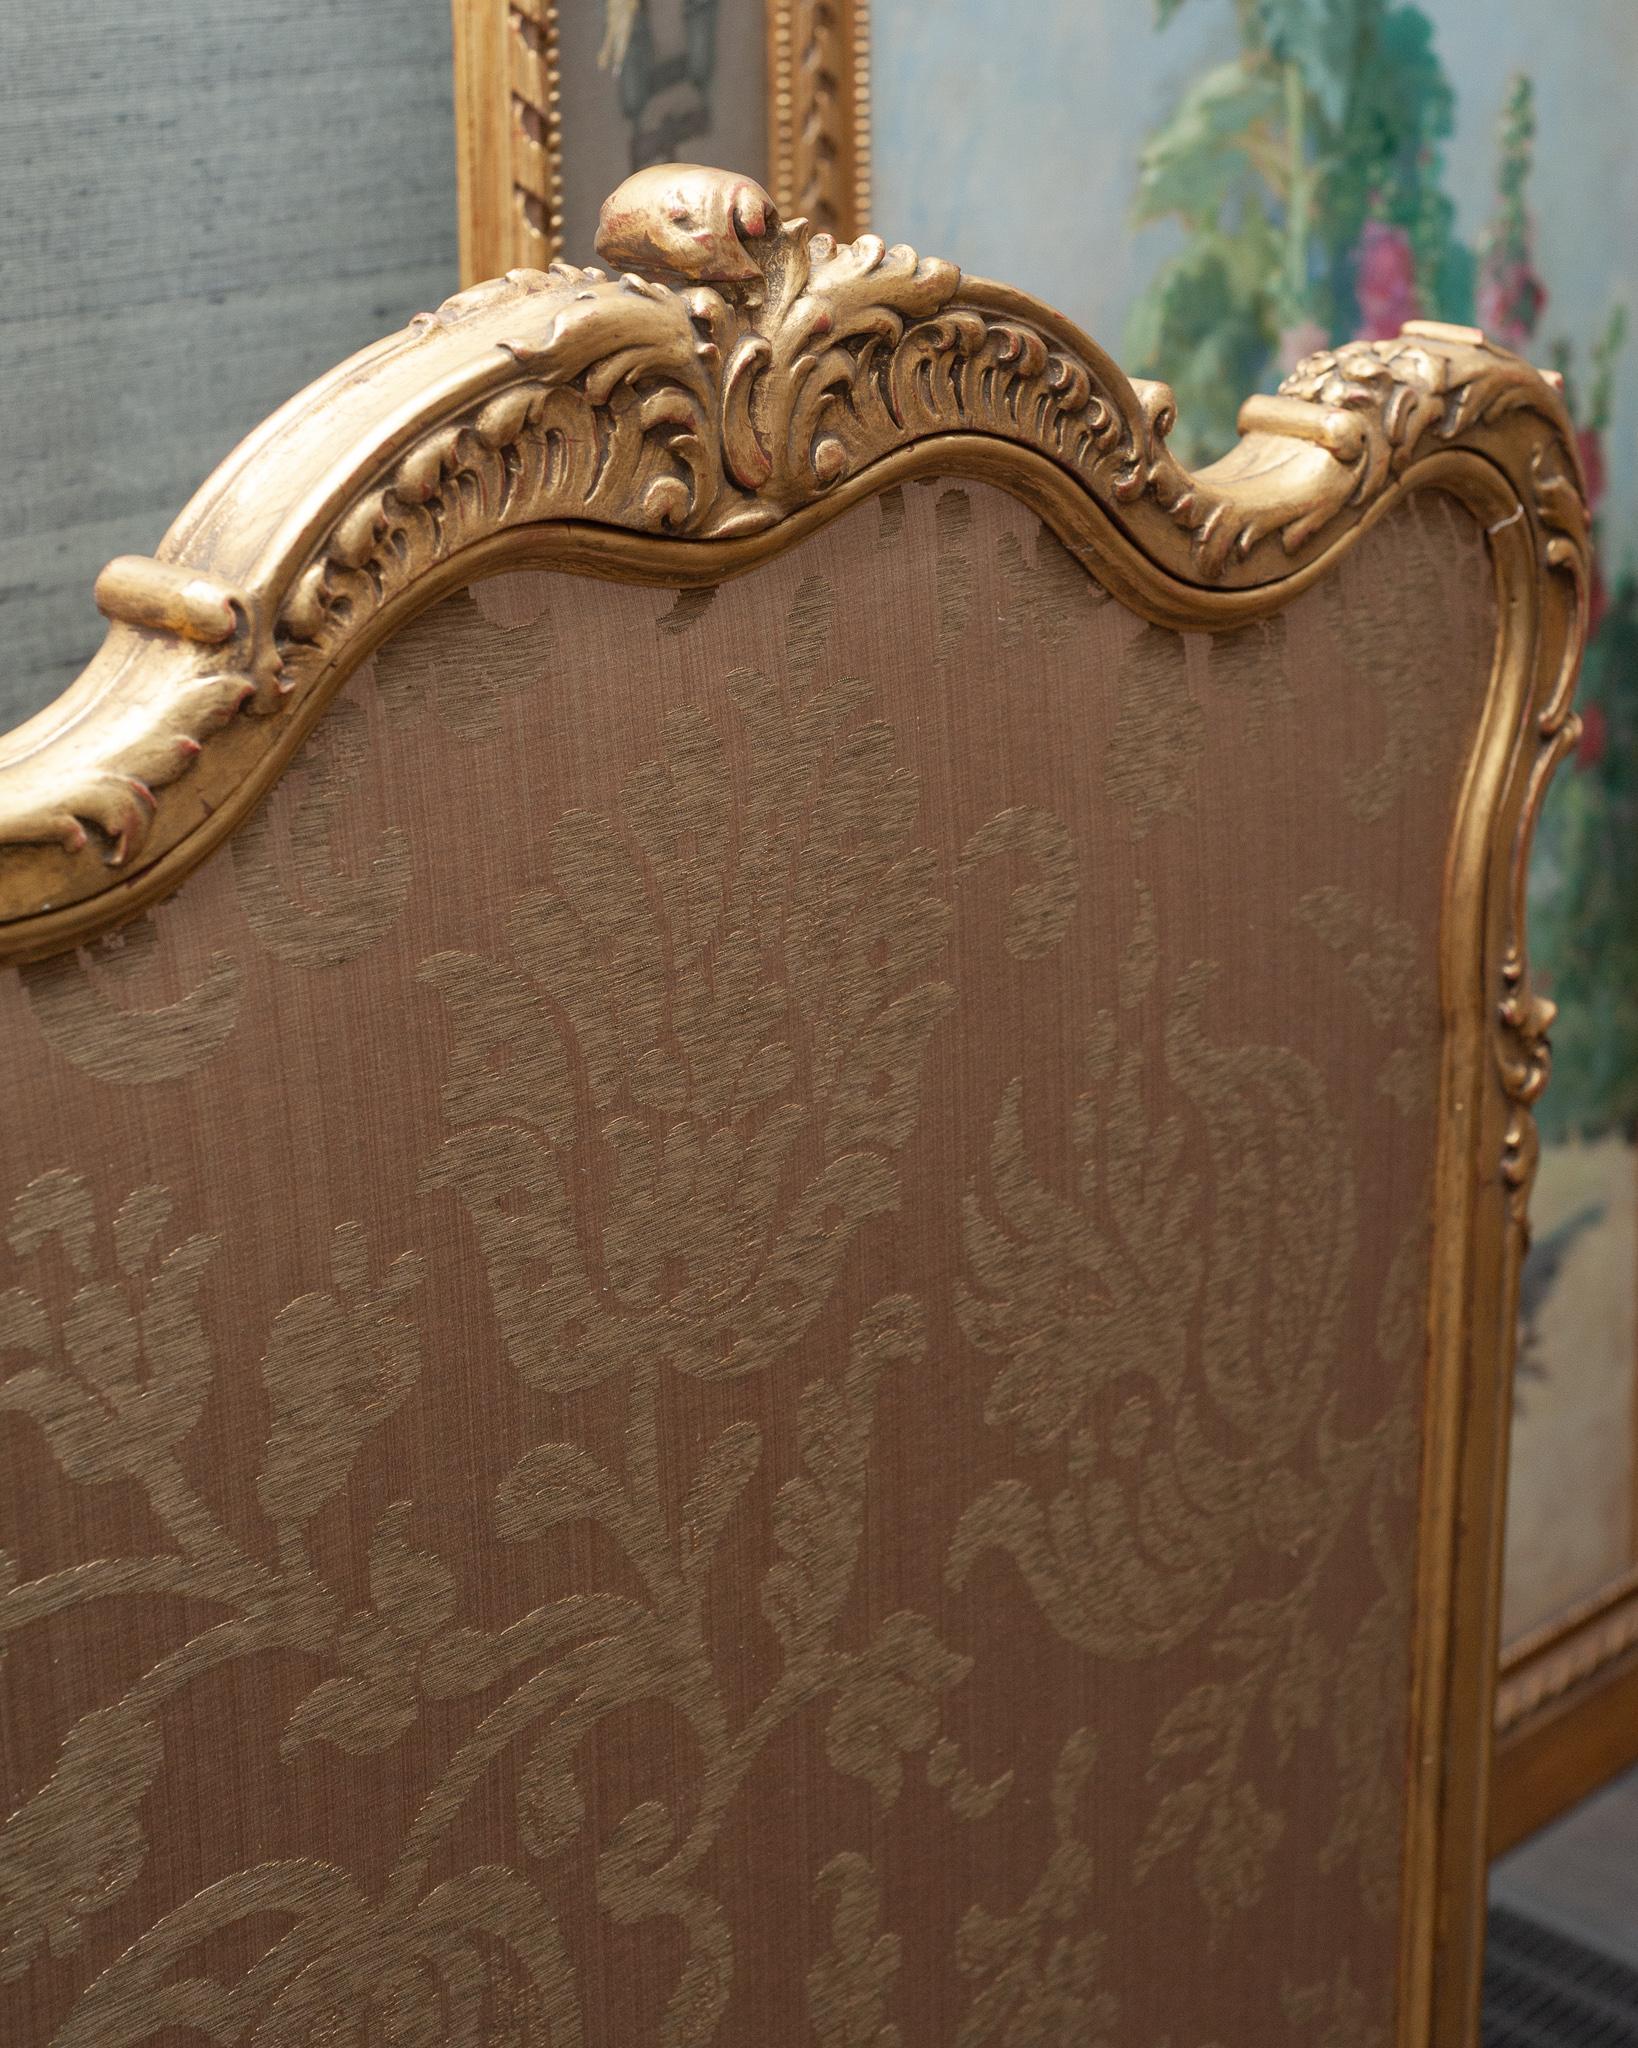 A beautiful antique French Napoleon III large fireplace screen with ornate hand carved wood and gold gilding. Newly reupholstered with damask fabric in tonal beige on front and back panels.